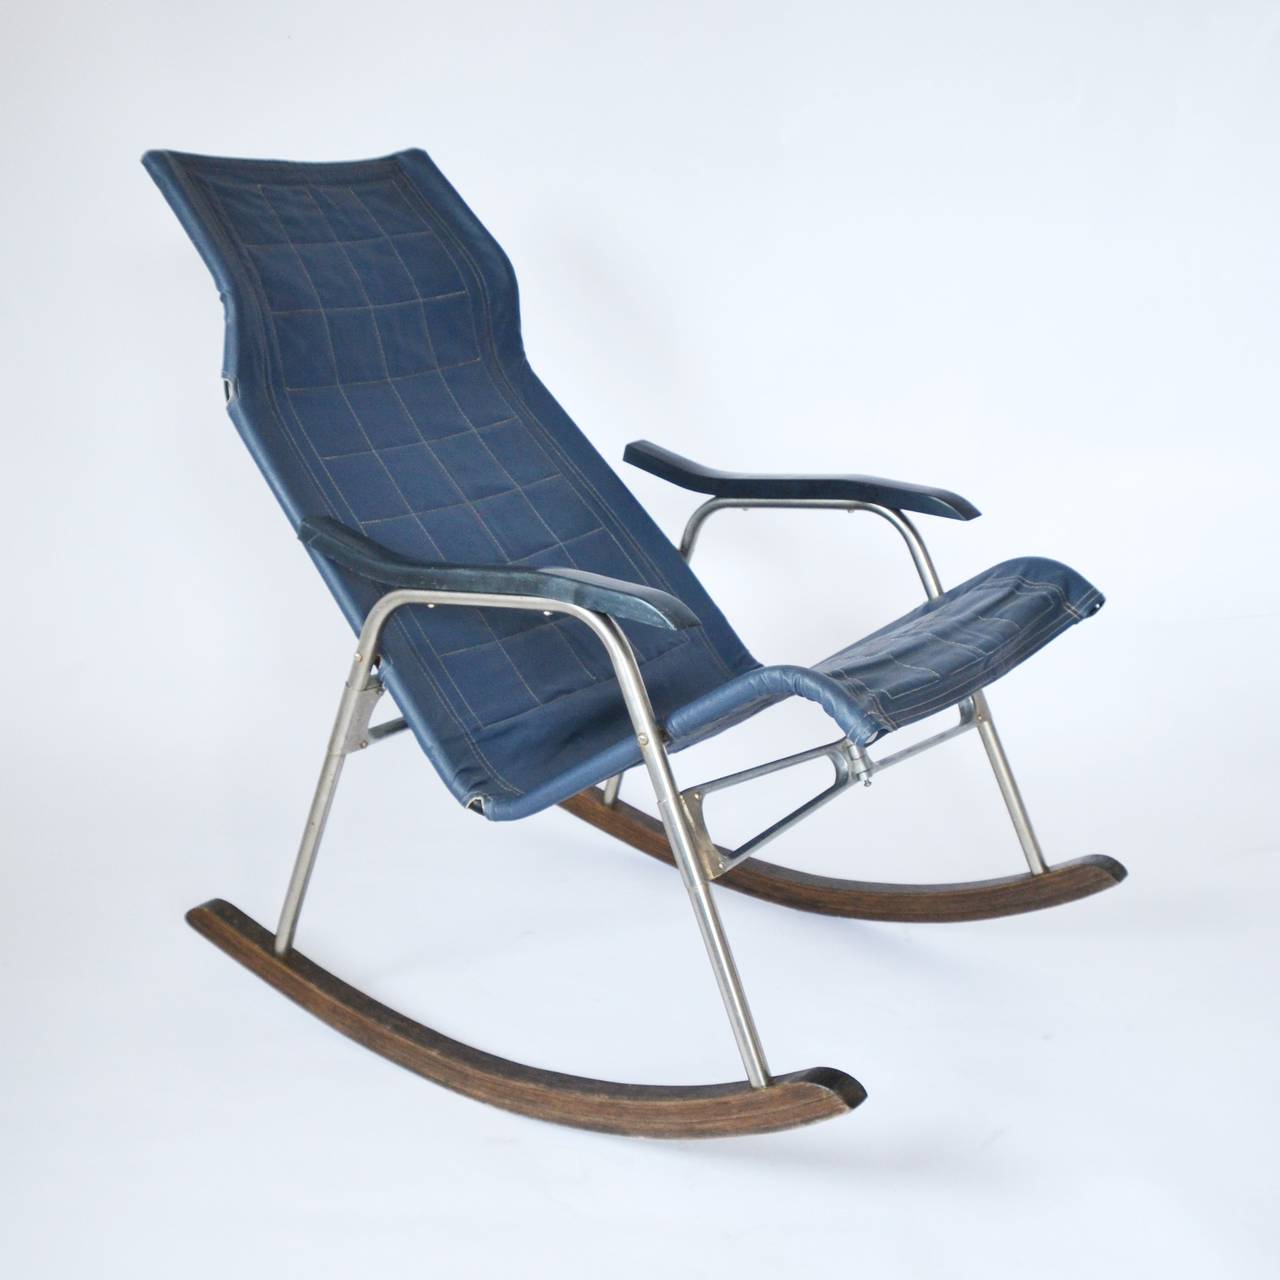 Rare folding rocking chair. It can be folded in the middle to a width of only 5.5 inch (14 cm). The seat height is 11.8-17.7 inch (30 - 45 cm). Nice mixture of materials: chrome, wood, blue synthetic leather.

Very good condition, only few wear of